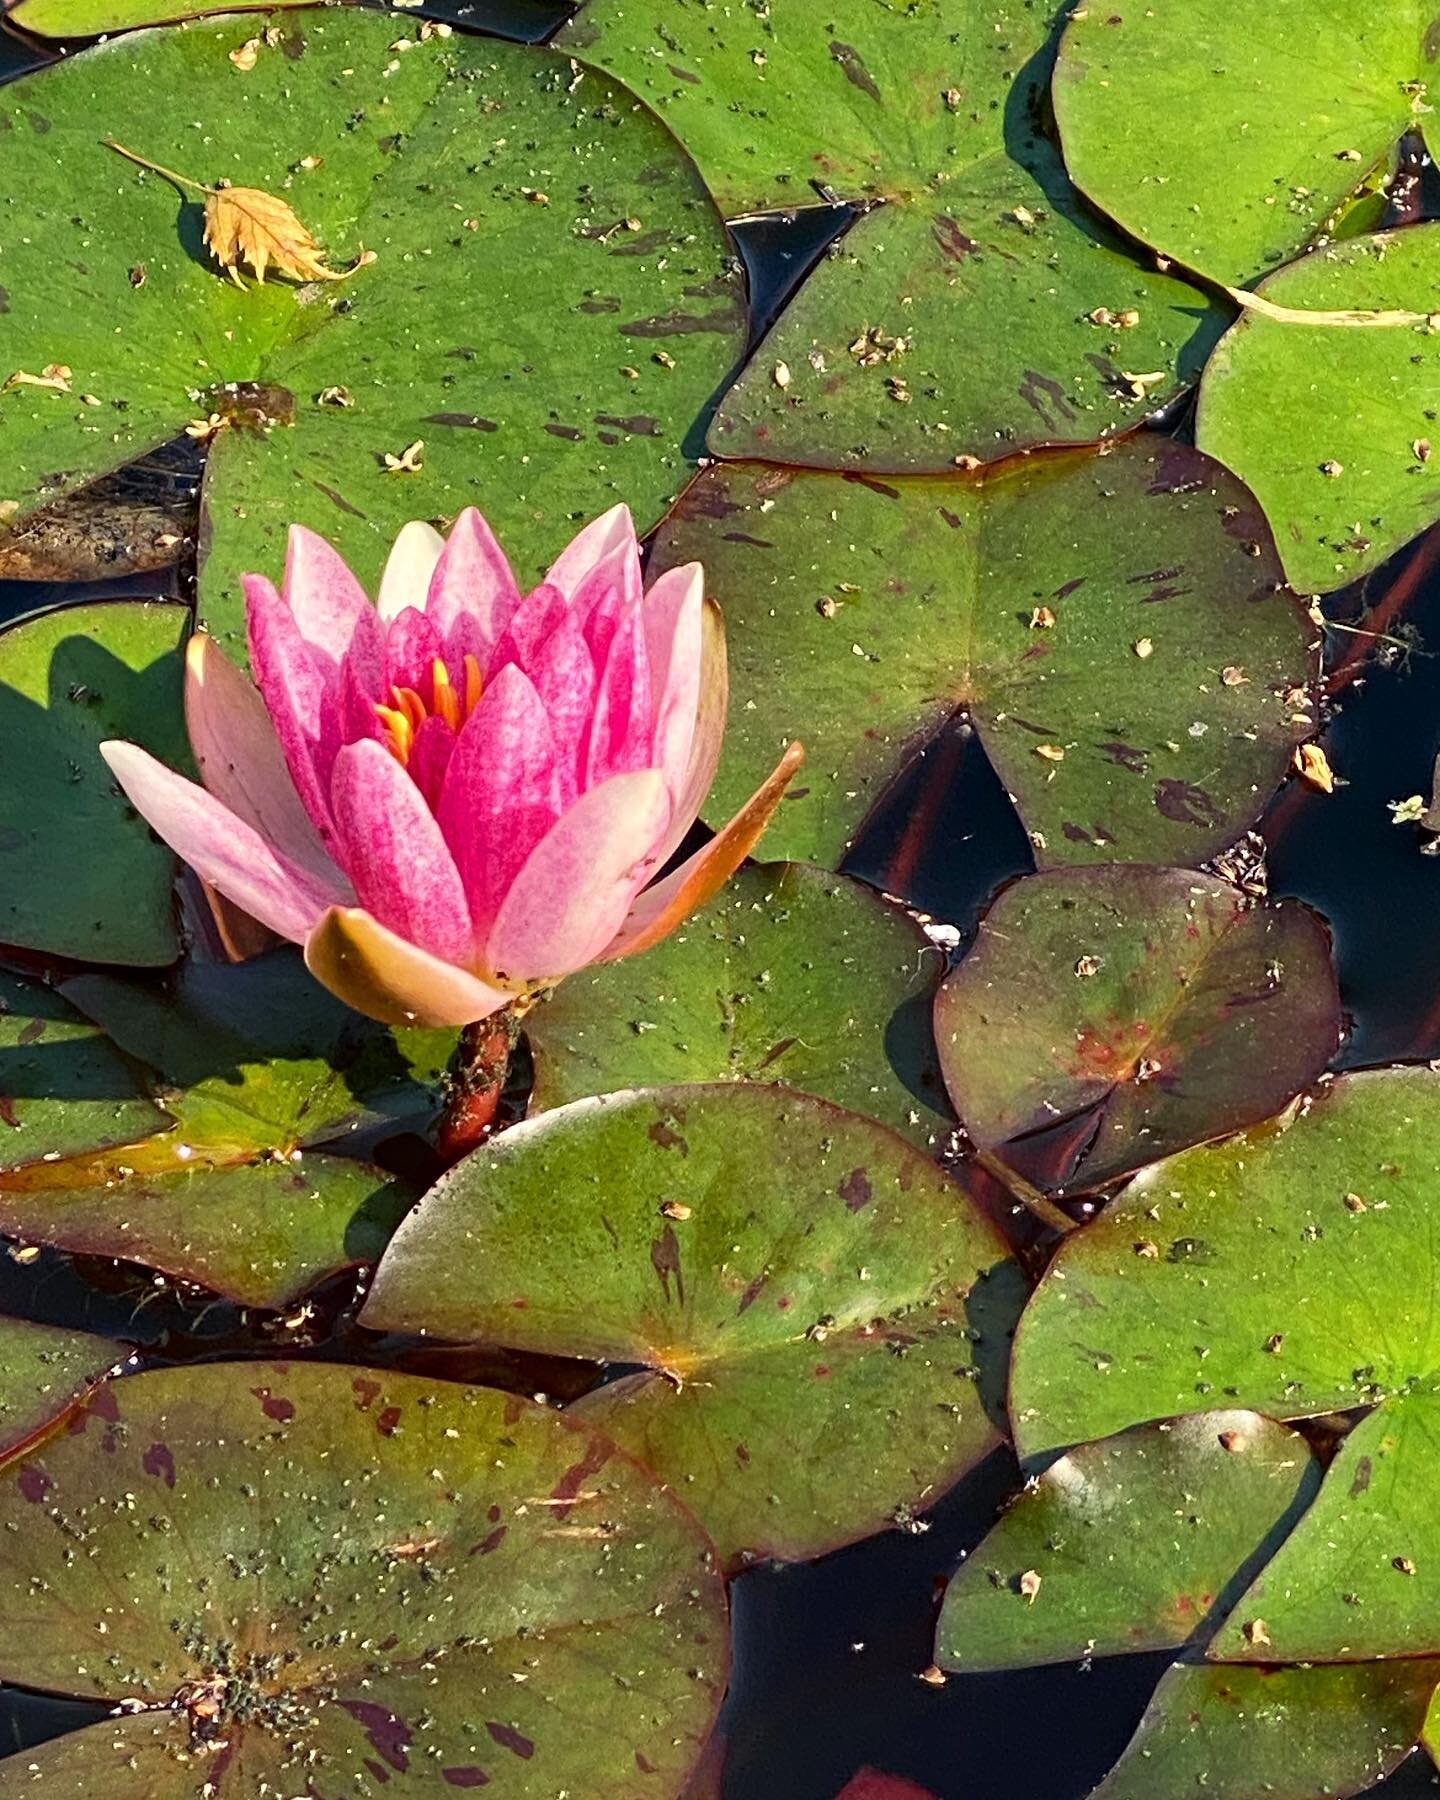 Delightful surprise found during a wander through my local park today #lilypad #wander